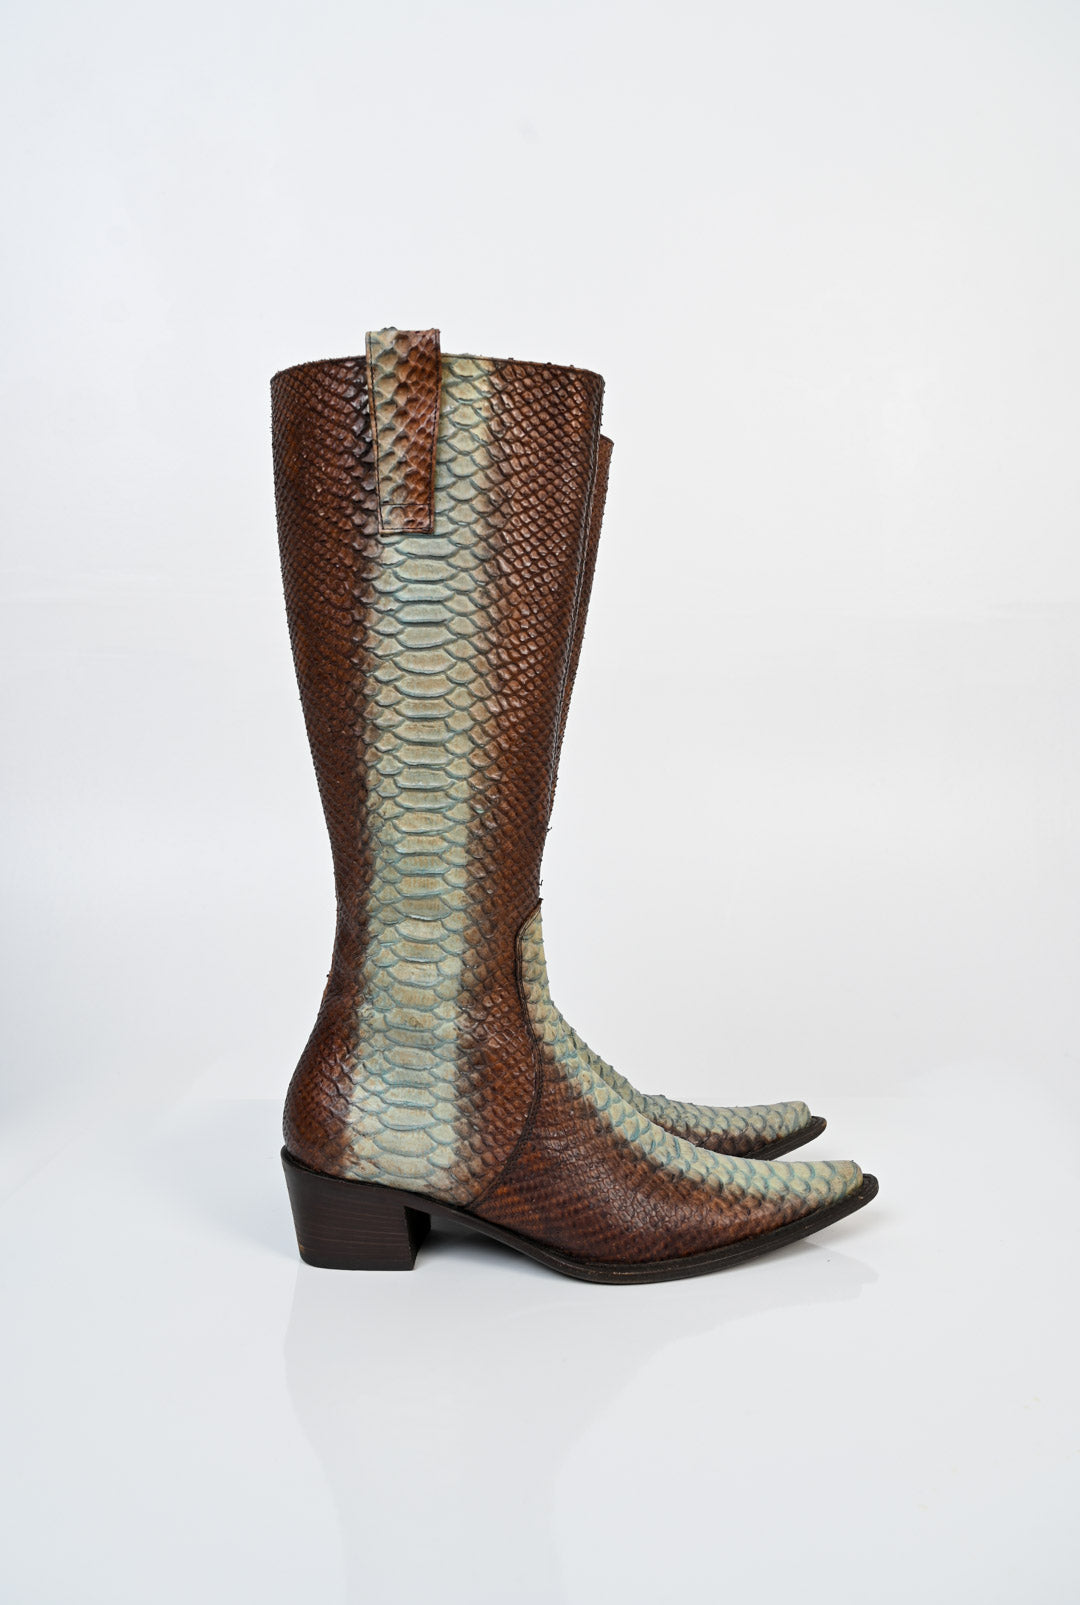 Mint Chocolate Ombre Snakeskin Boots (39)